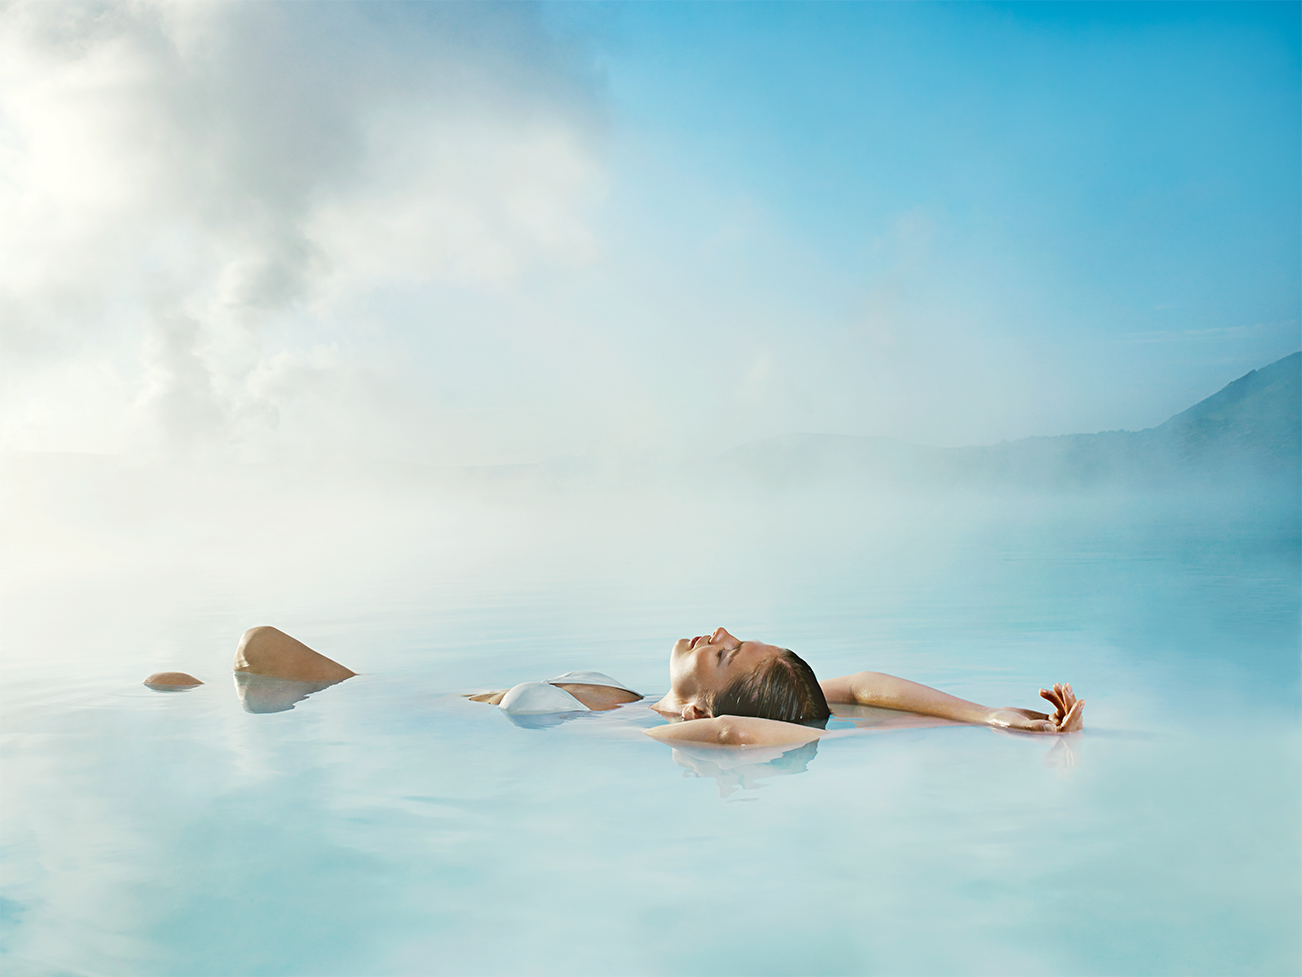 The mineral-rich waters of the Blue Lagoon are sure to recharge you after days on the road